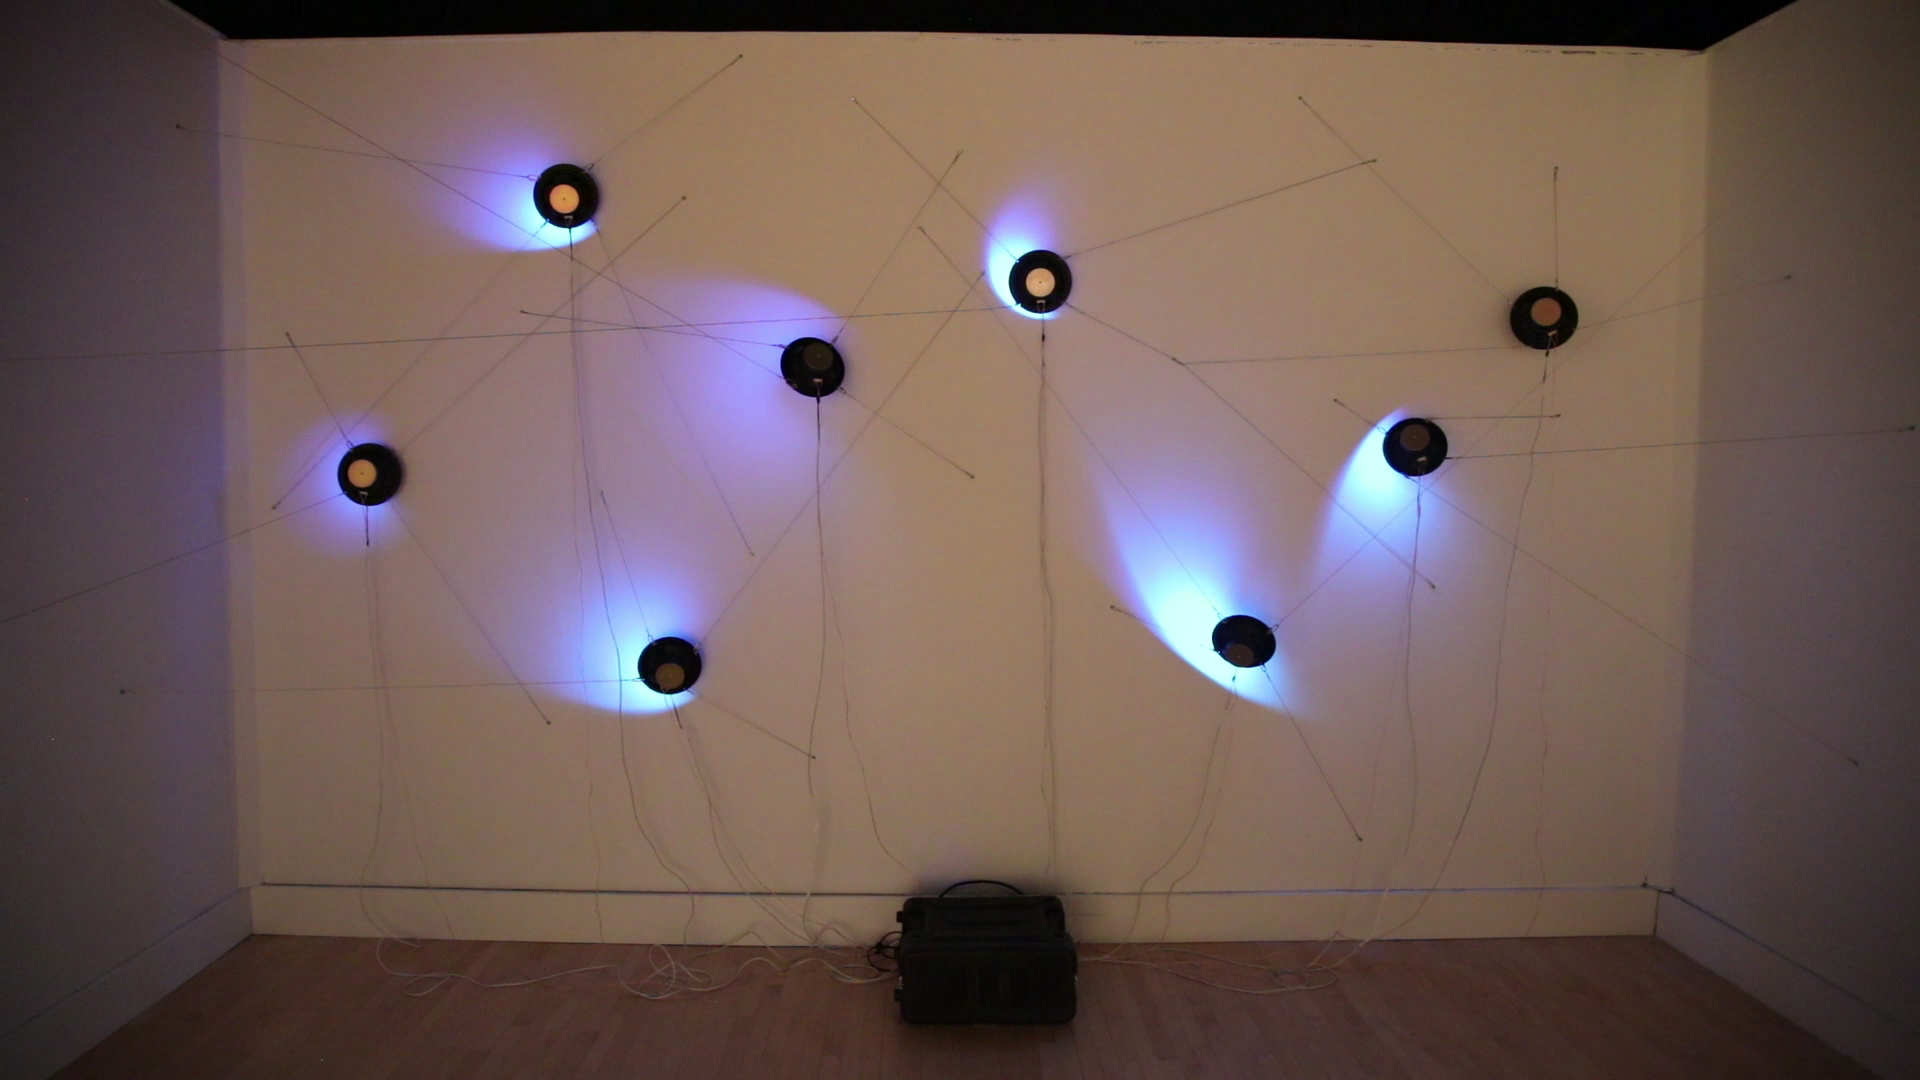 an image of 8 speakers hung against a wall, with LEDs in their cones illuminating the wall